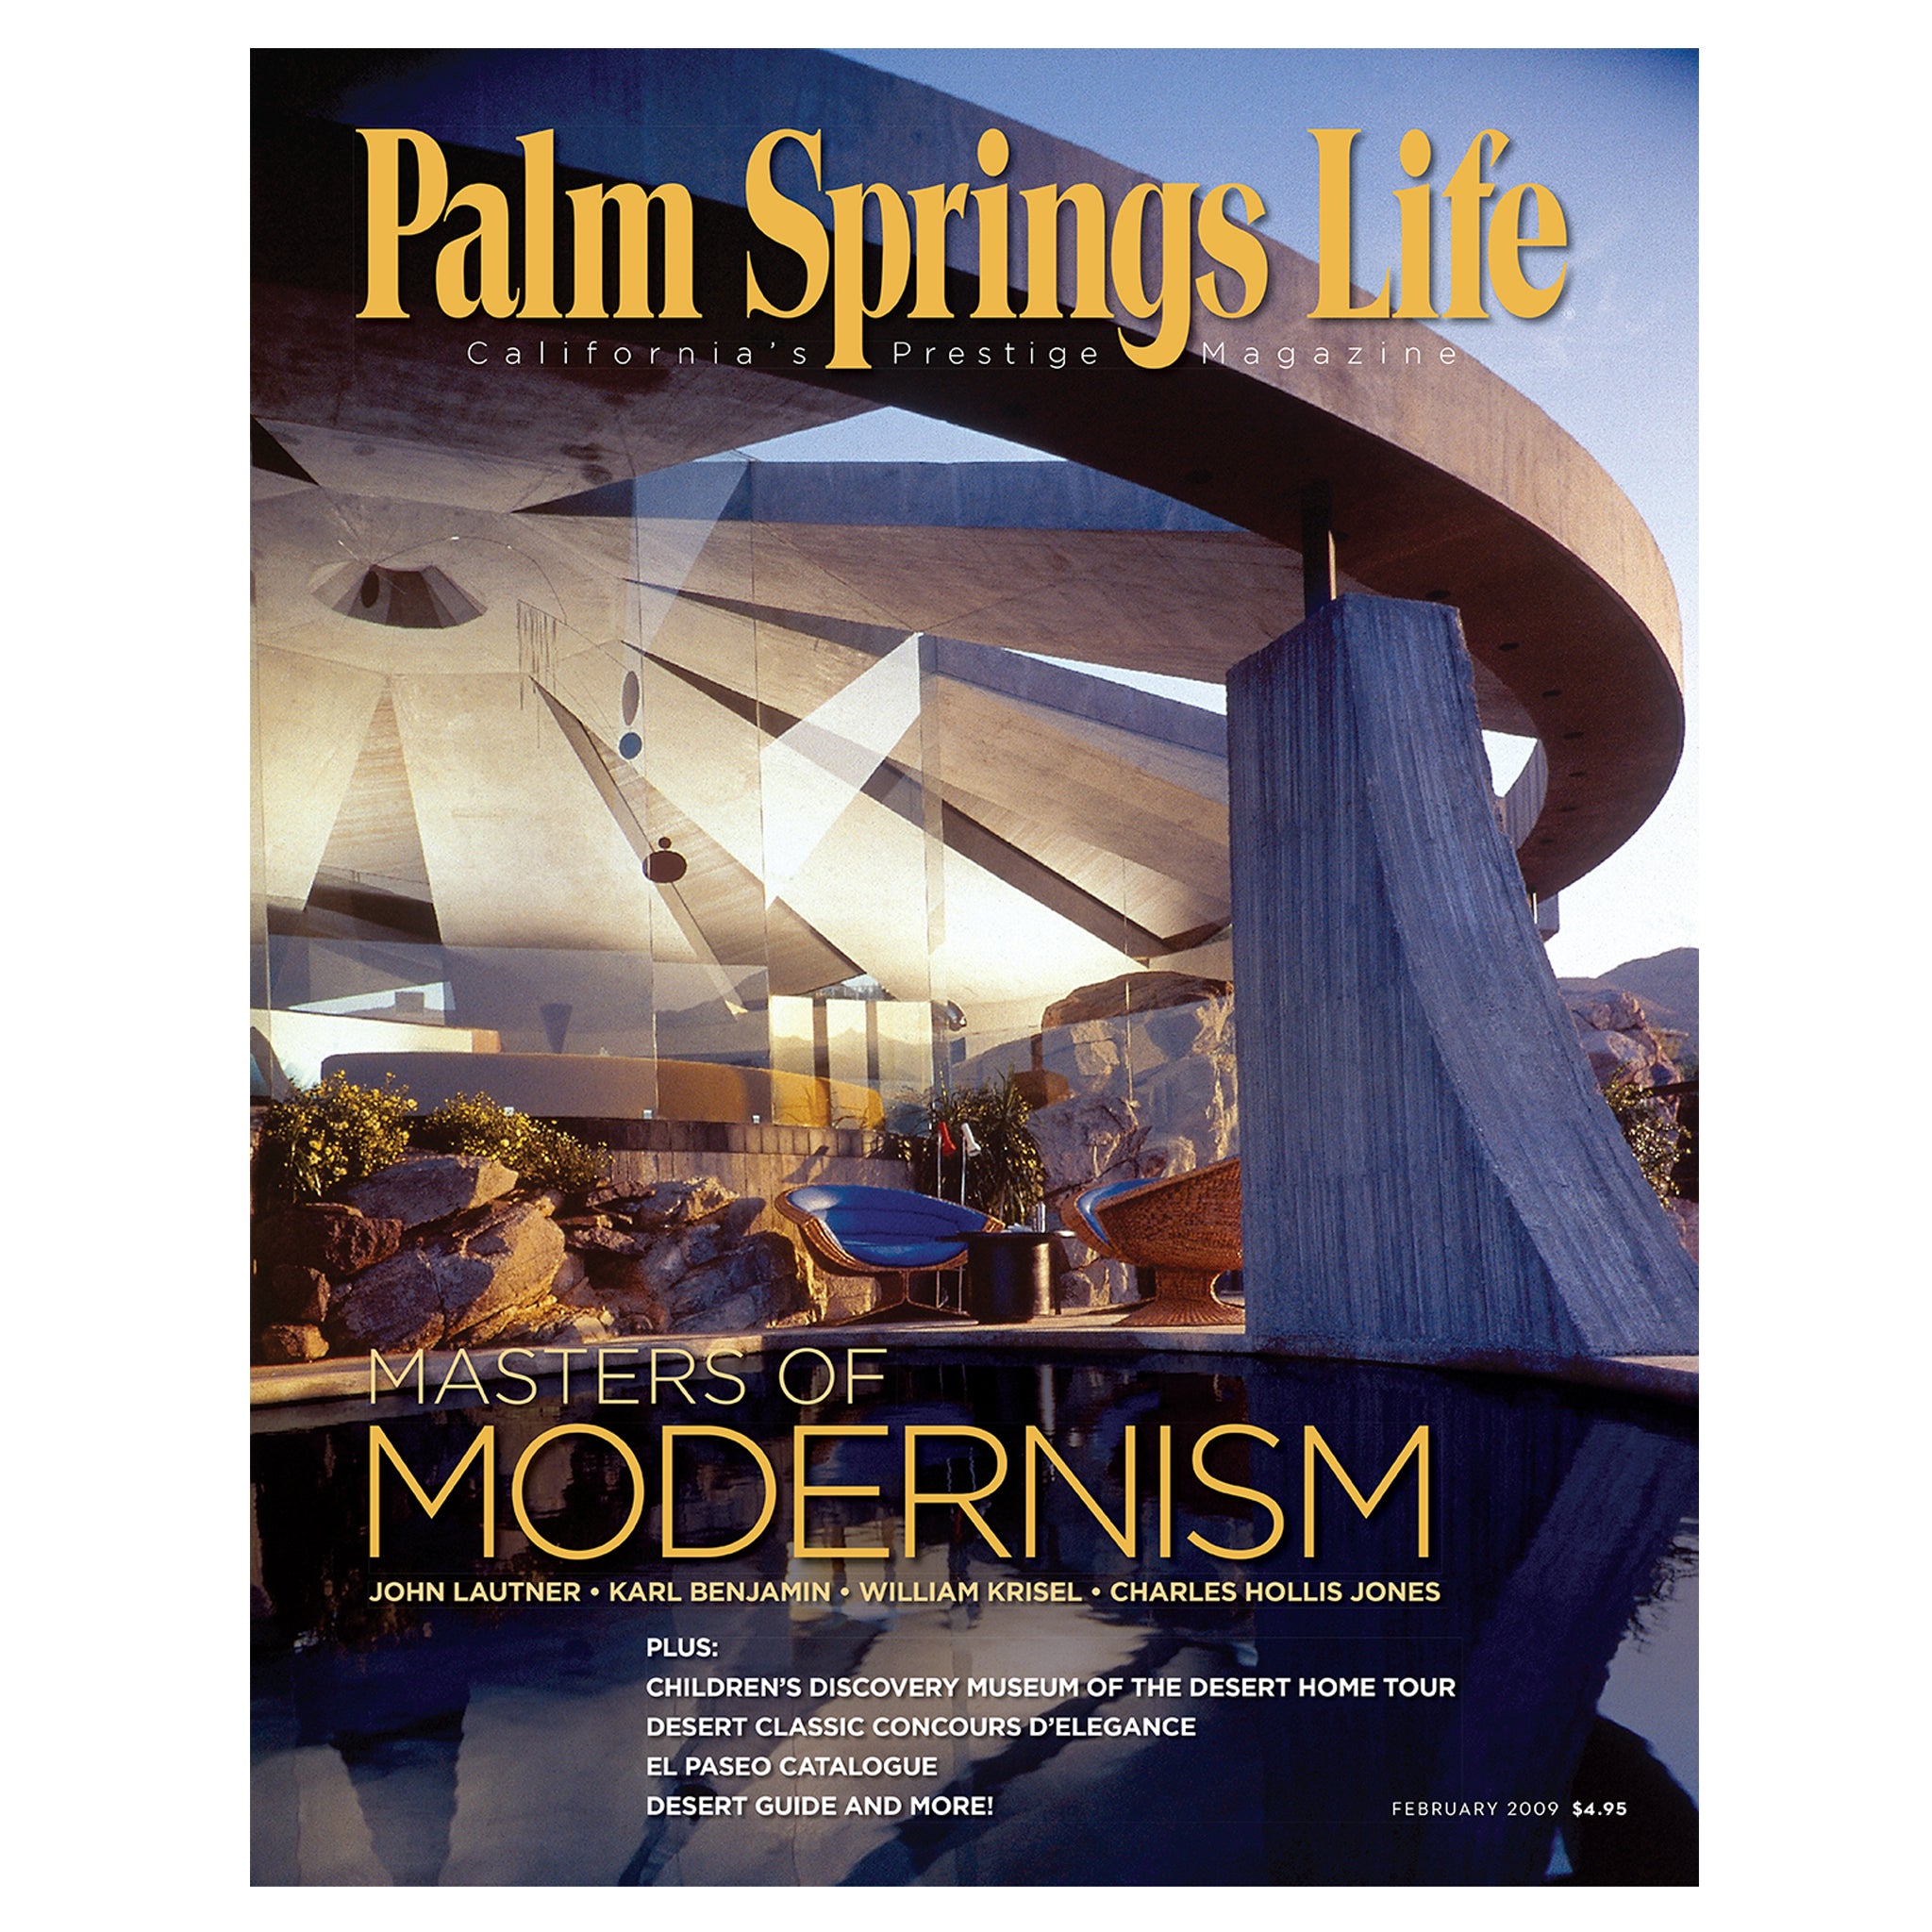 Palm Springs Life - February 2009 - Cover Poster